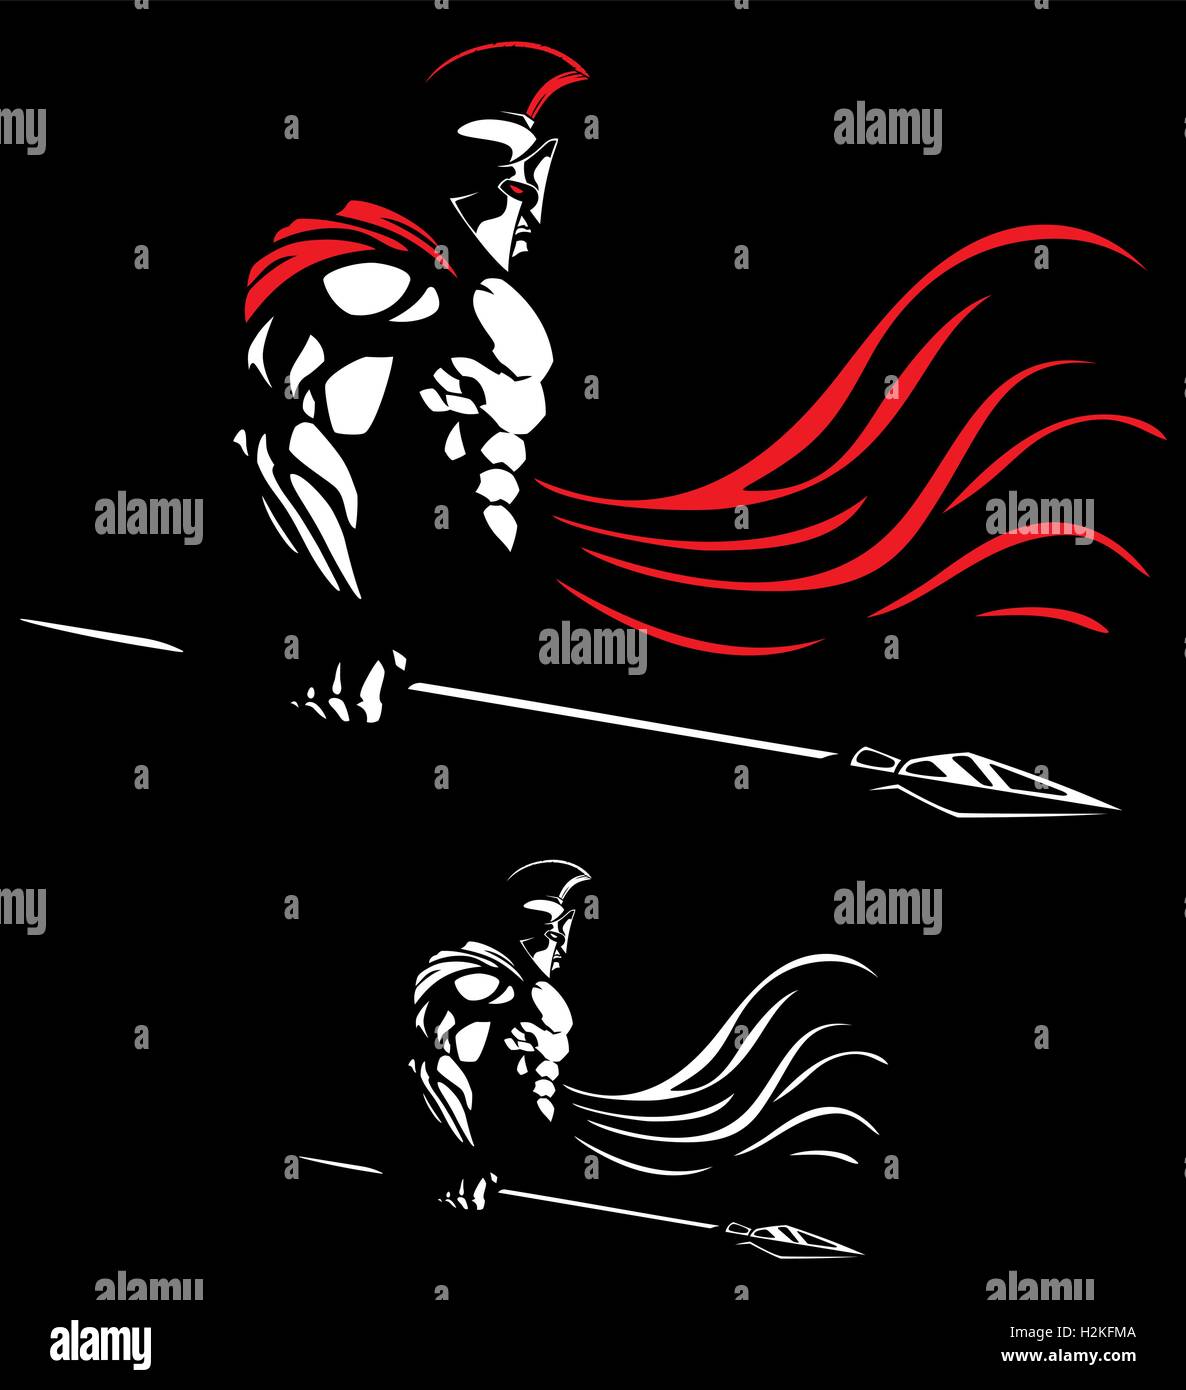 Illustration of Spartan warrior on black background in 2 color versions. Stock Vector